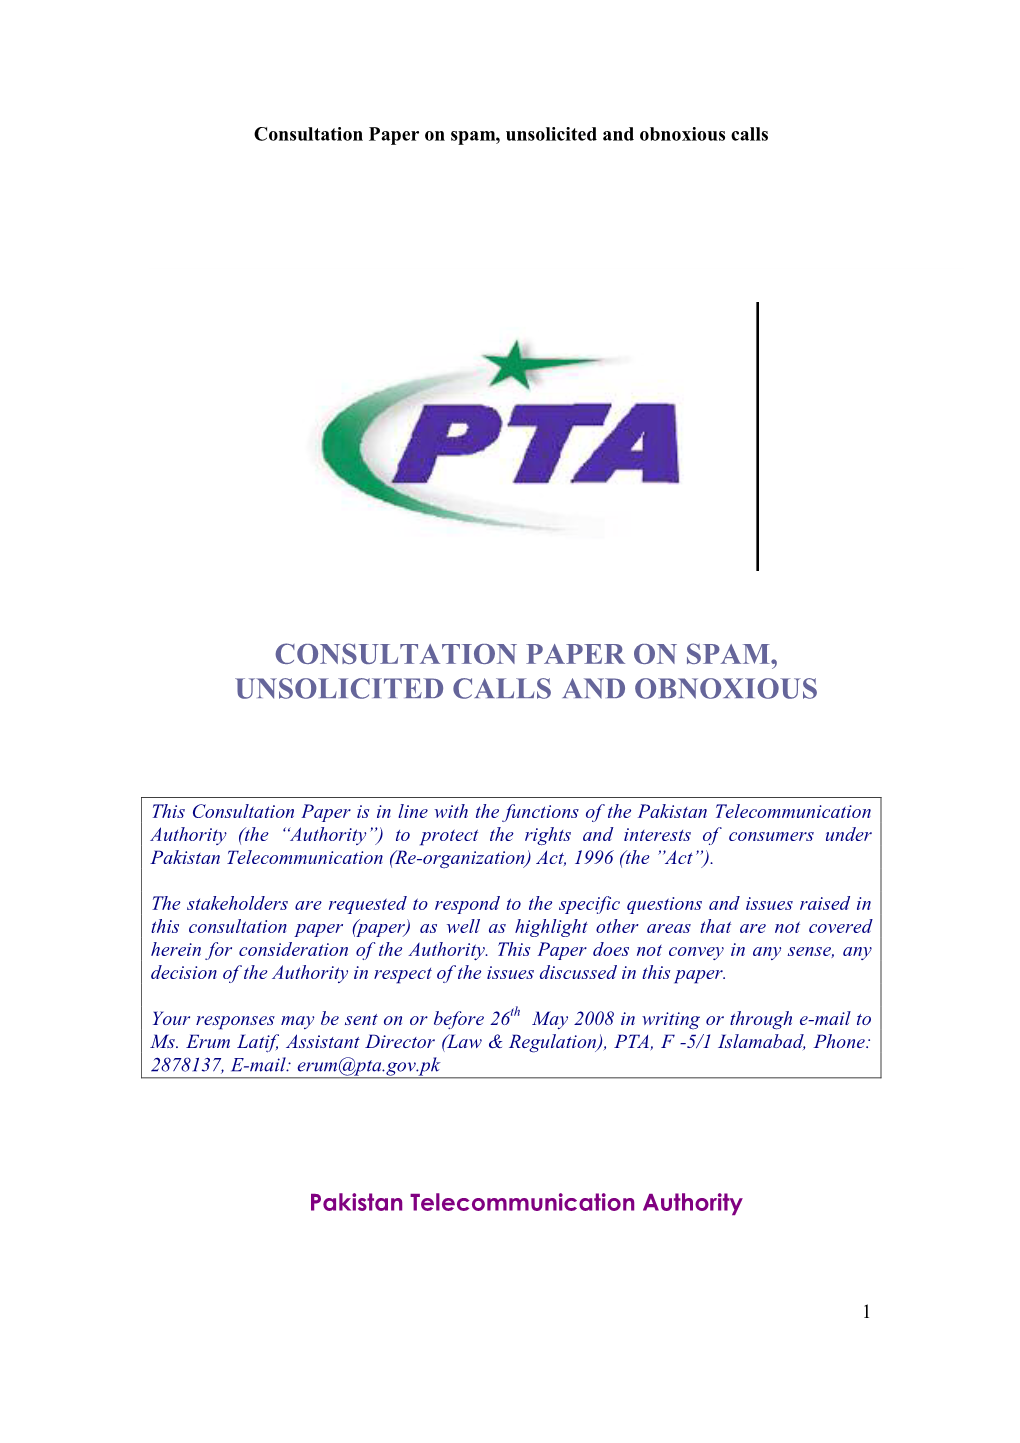 Consultation Paper on Spam, Unsolicited Calls and Obnoxious